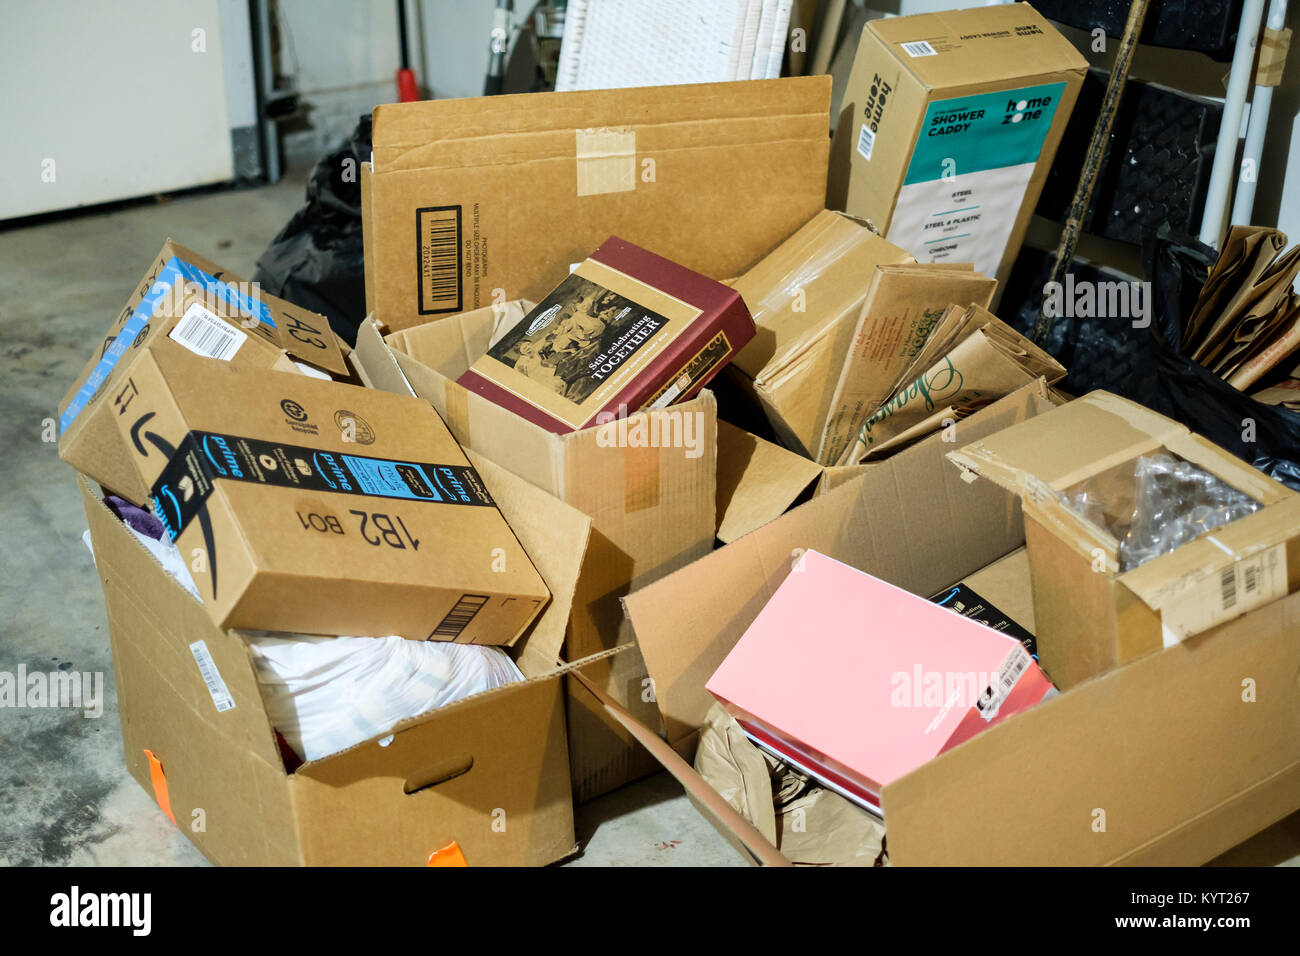 A pile of cardboard boxes in a garage saved for moving day. Oklahoma, USA. Concepts. Stock Photo